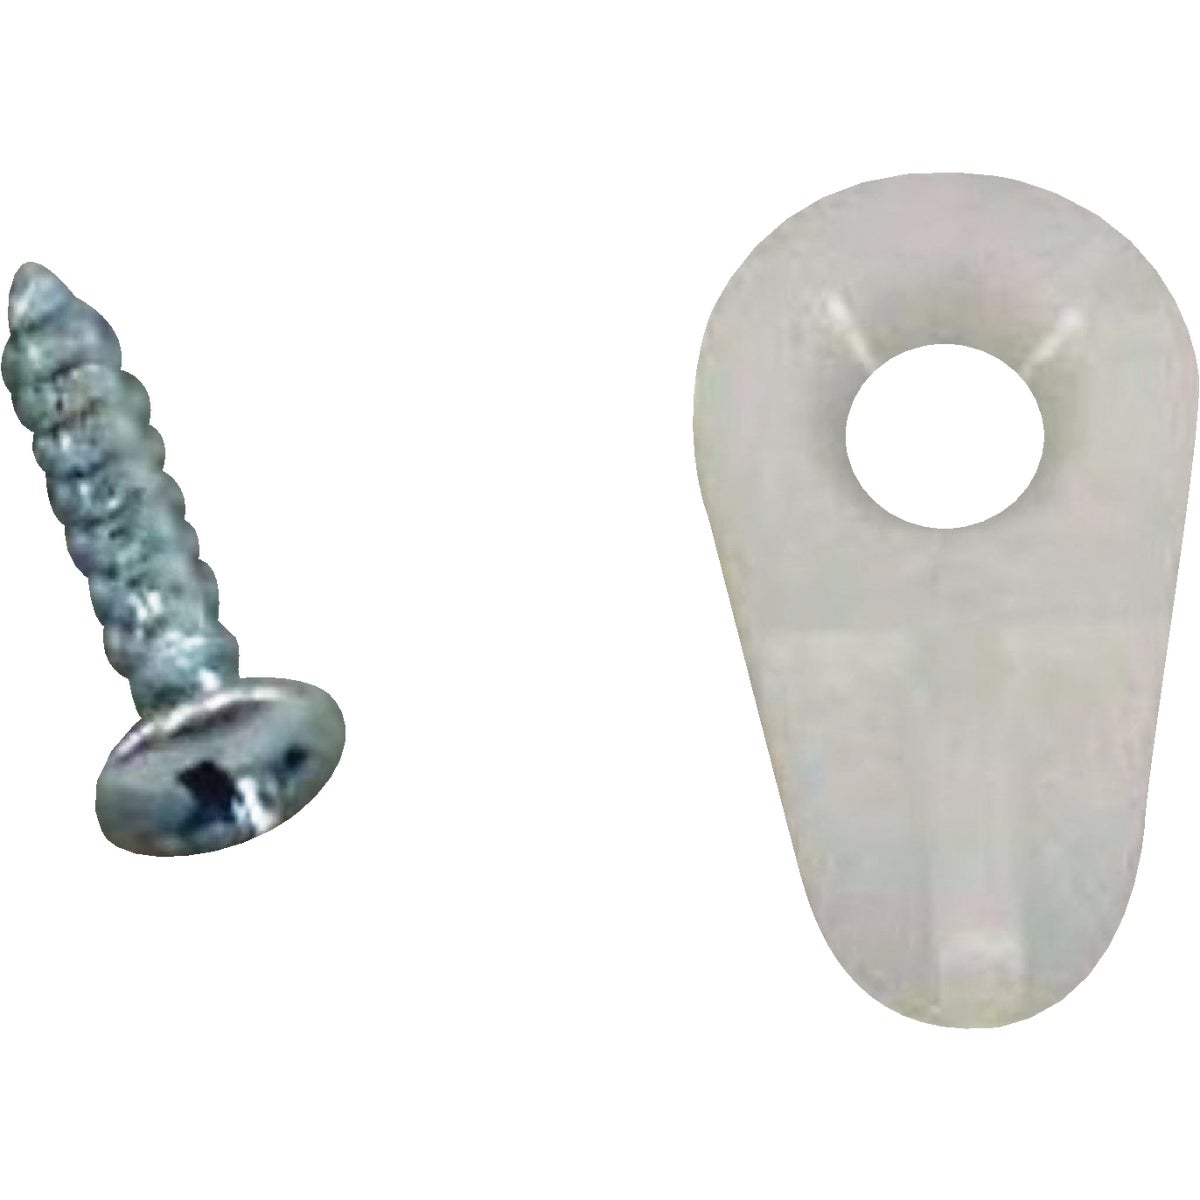 Item 220485, White nylon storm and screen clips with screws for flush mounting screen ad